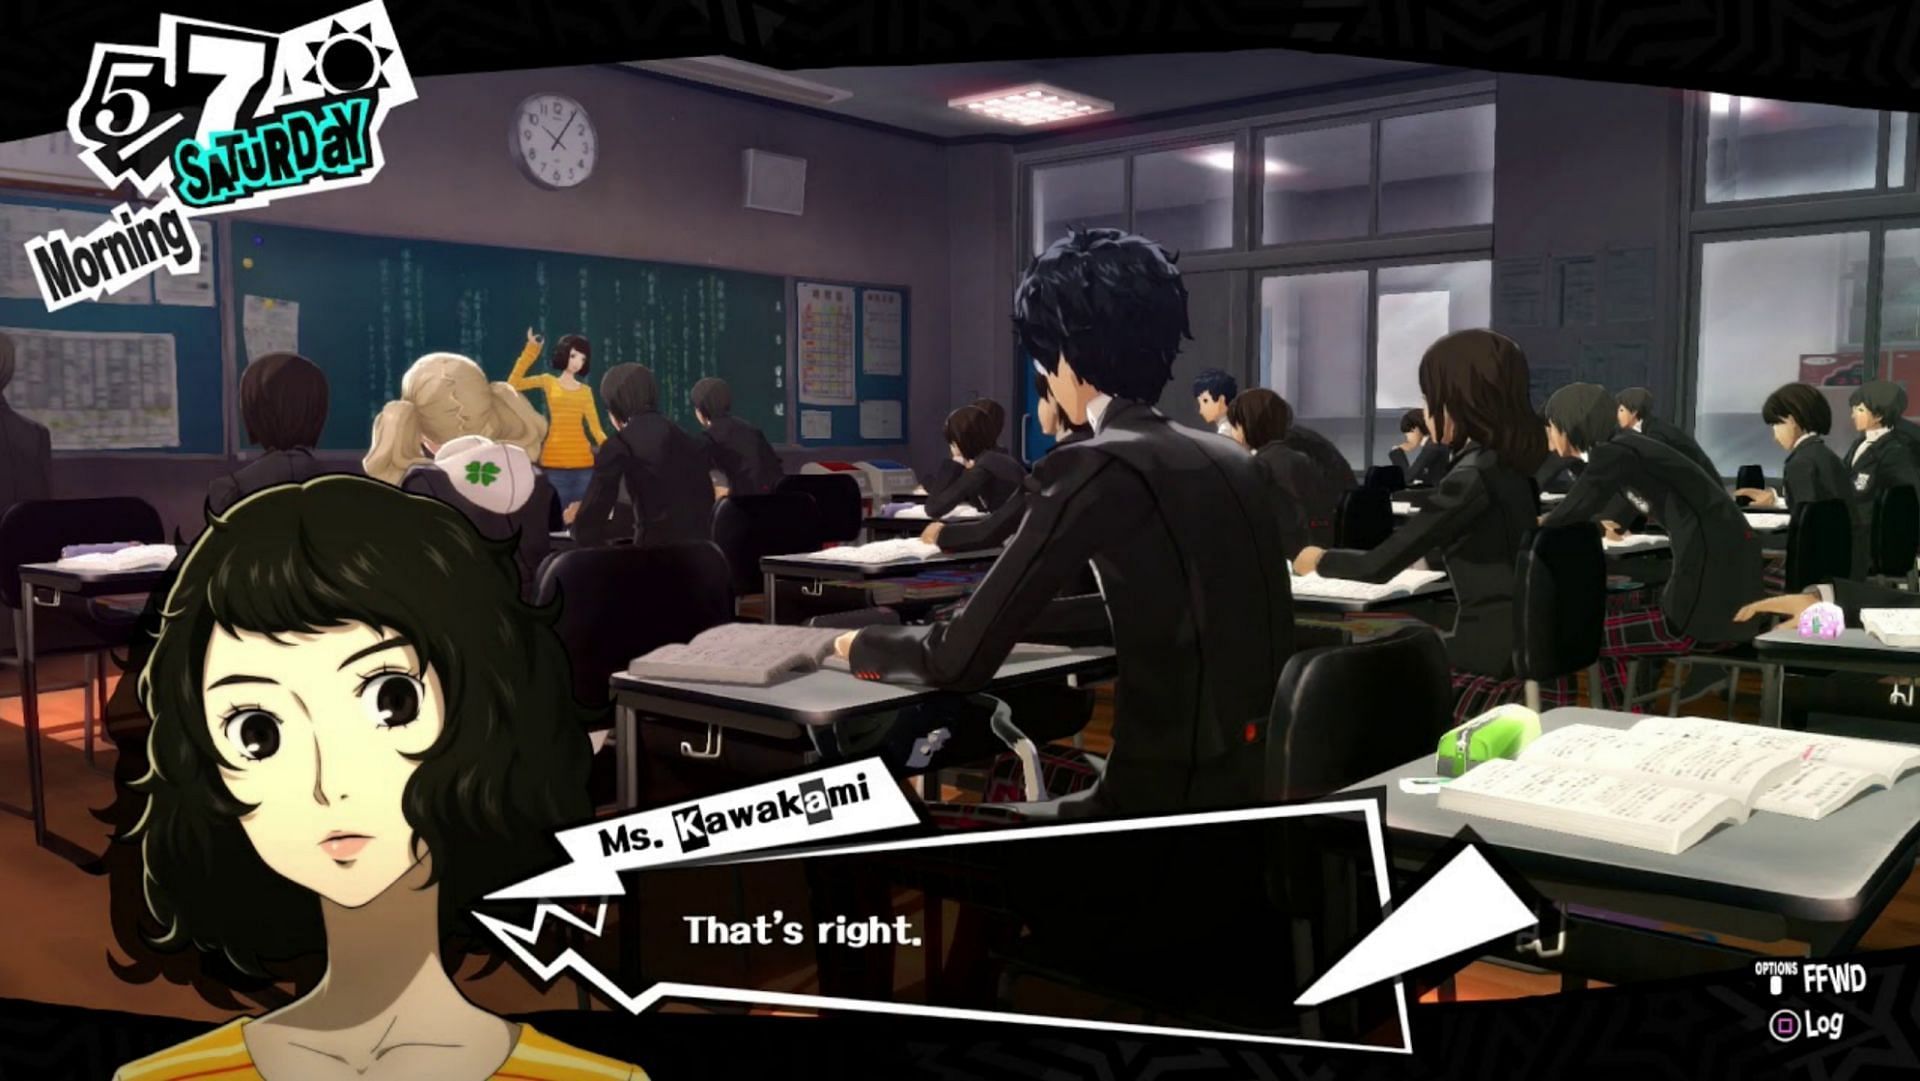 Persona 5 Royal - All Classroom Answers: April 